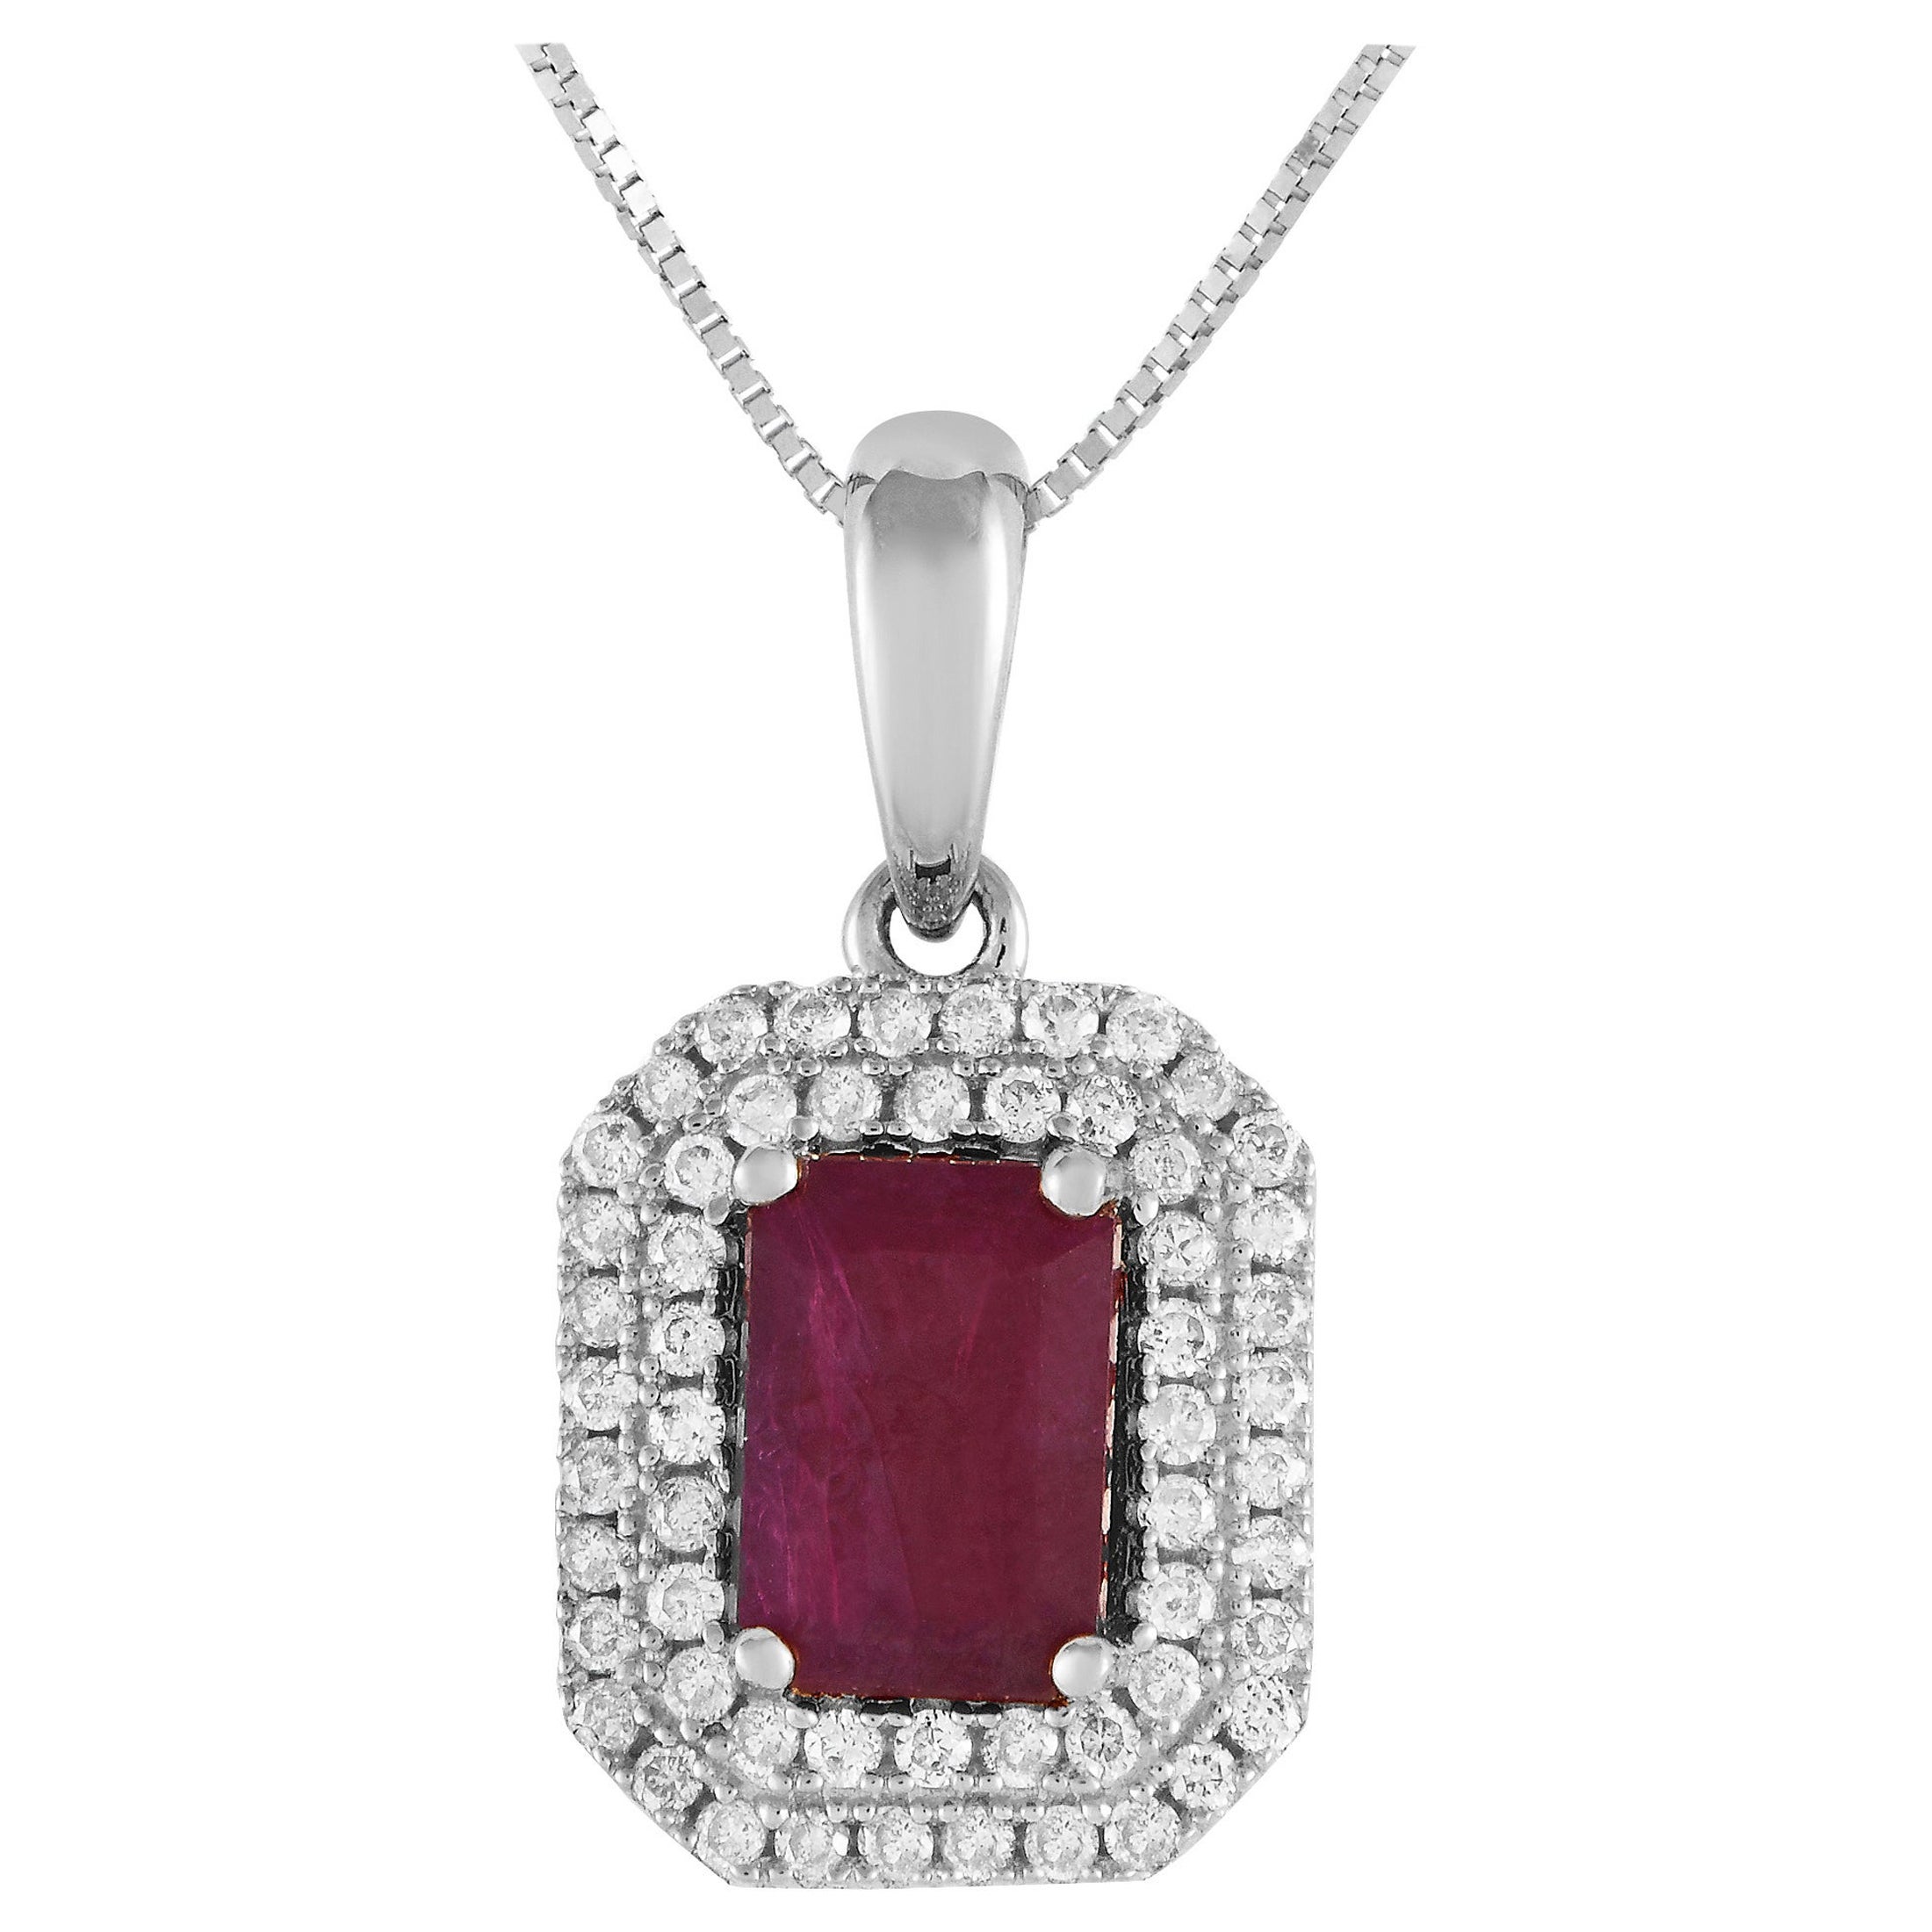 LB Exclusive 14K White Gold 0.24ct Diamond & Ruby Necklace PD4-15905WRU For Sale